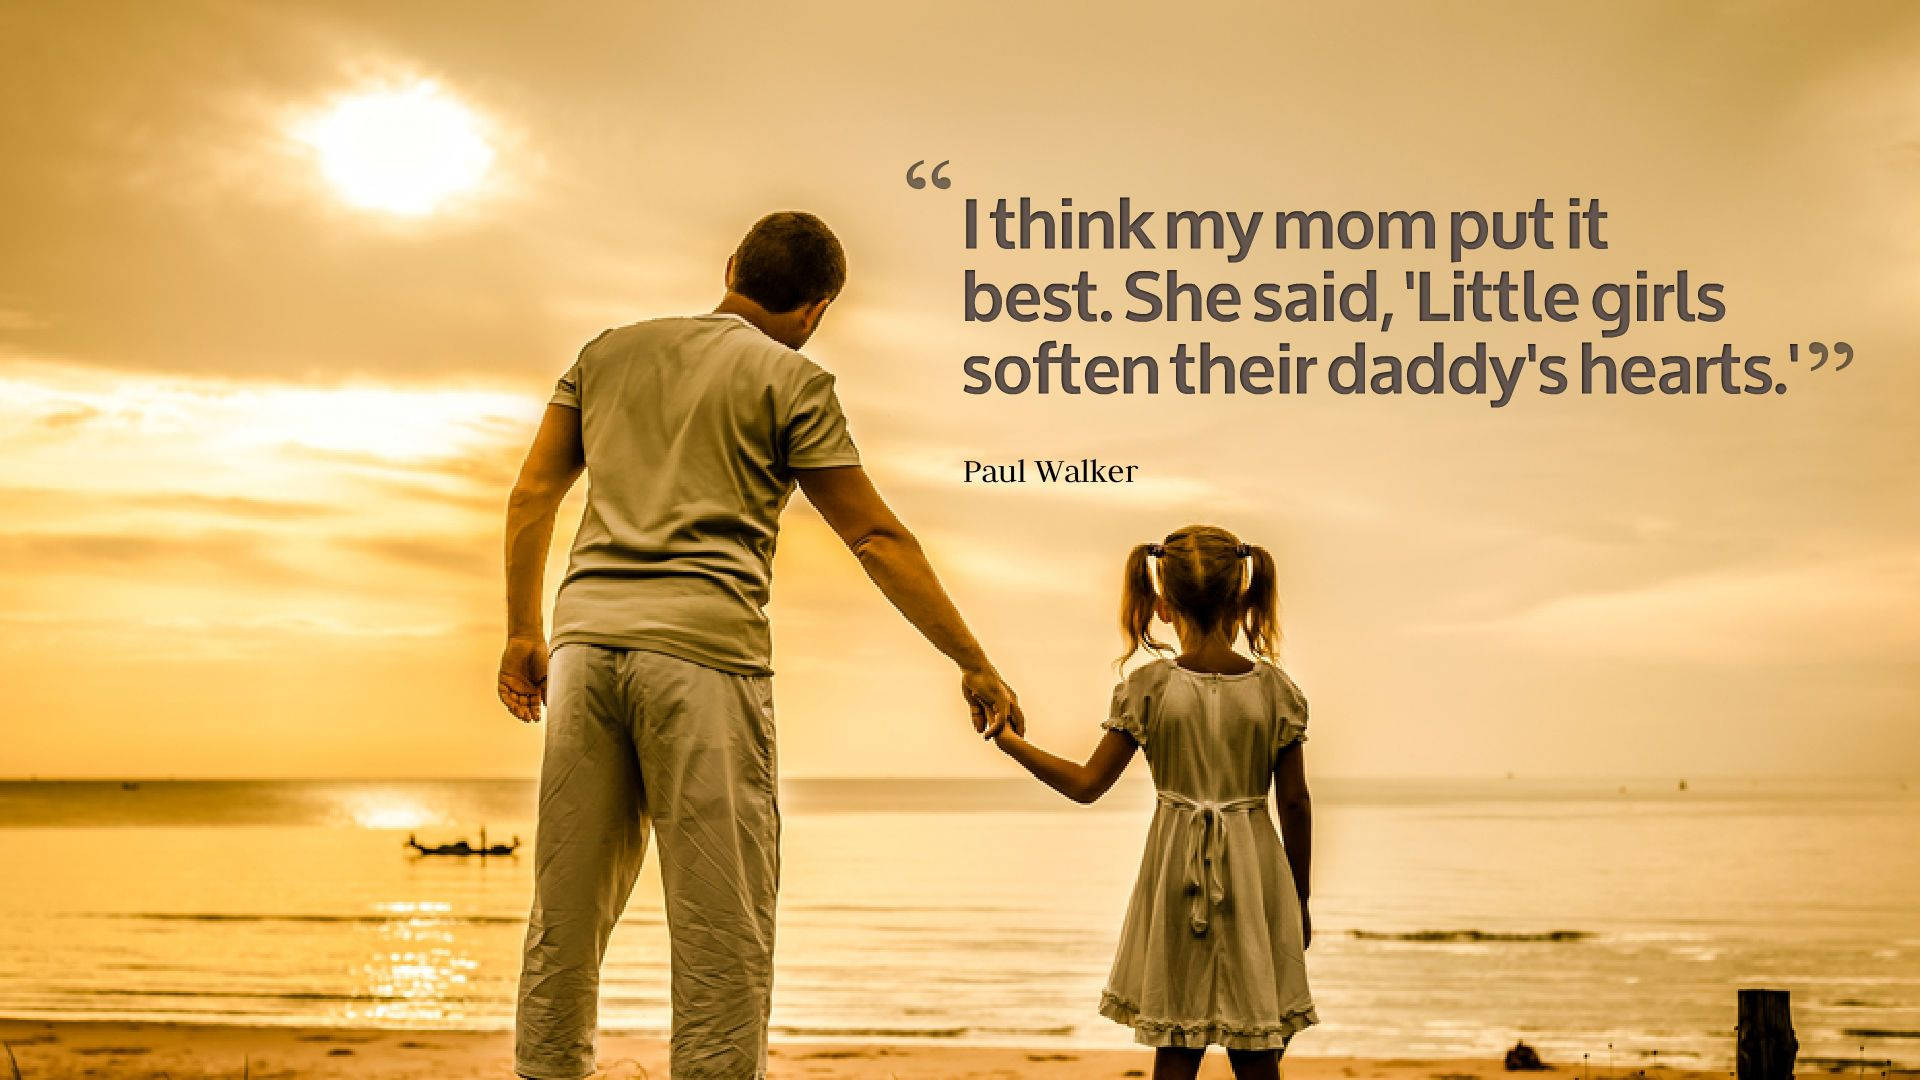 Paul Walker's Quote For Father's Day Background